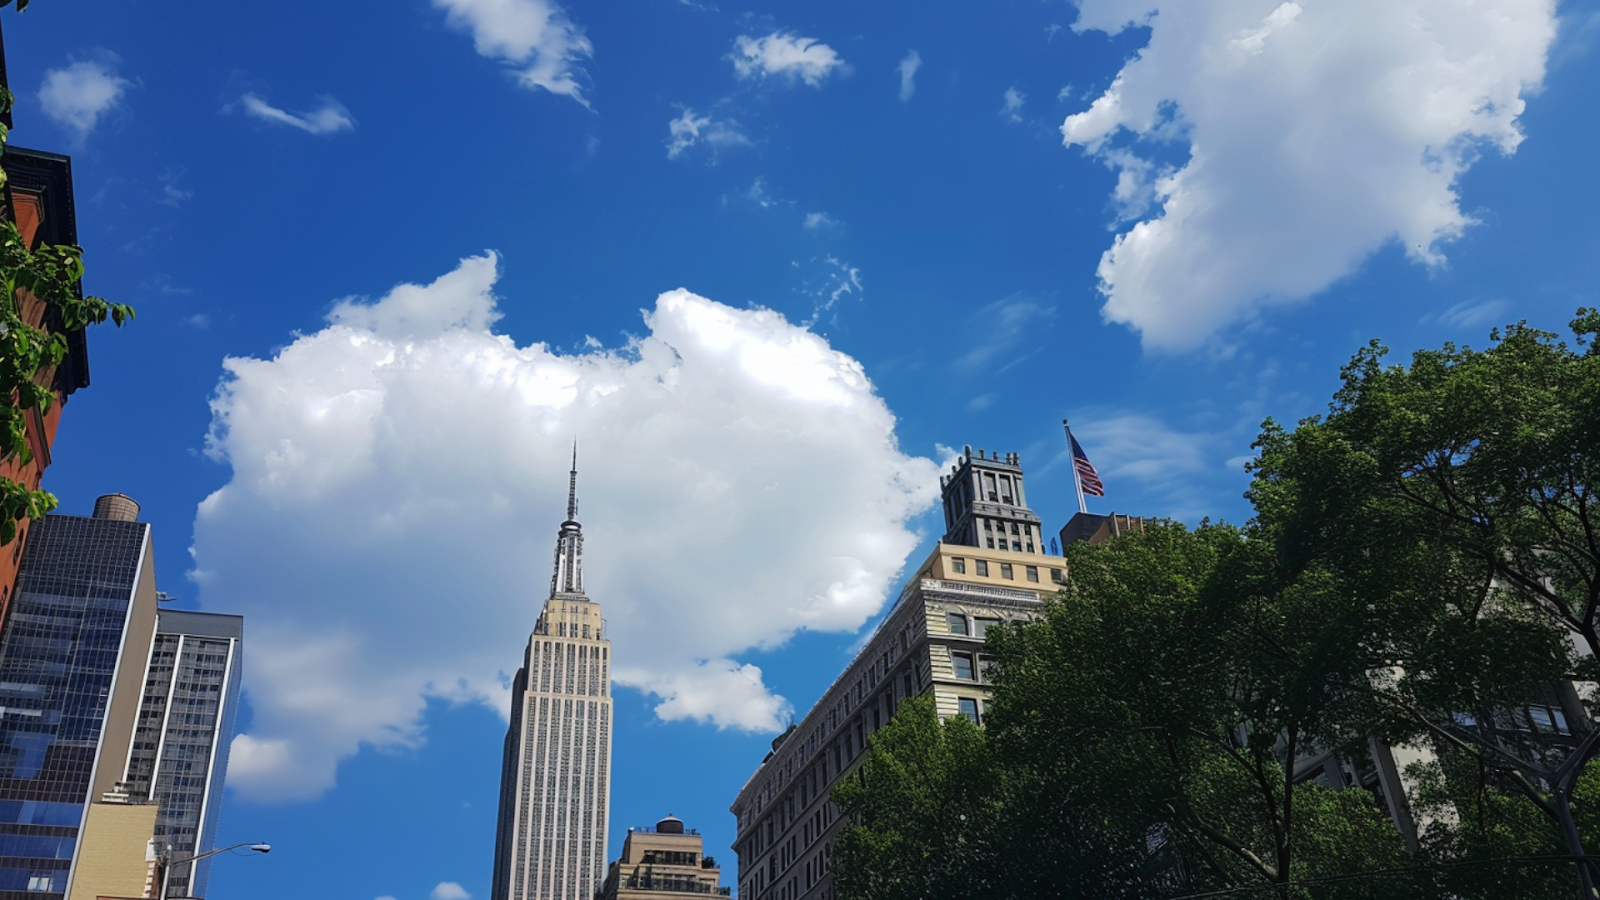 The Empire State Building in New York City underneath blue, cloudy skies